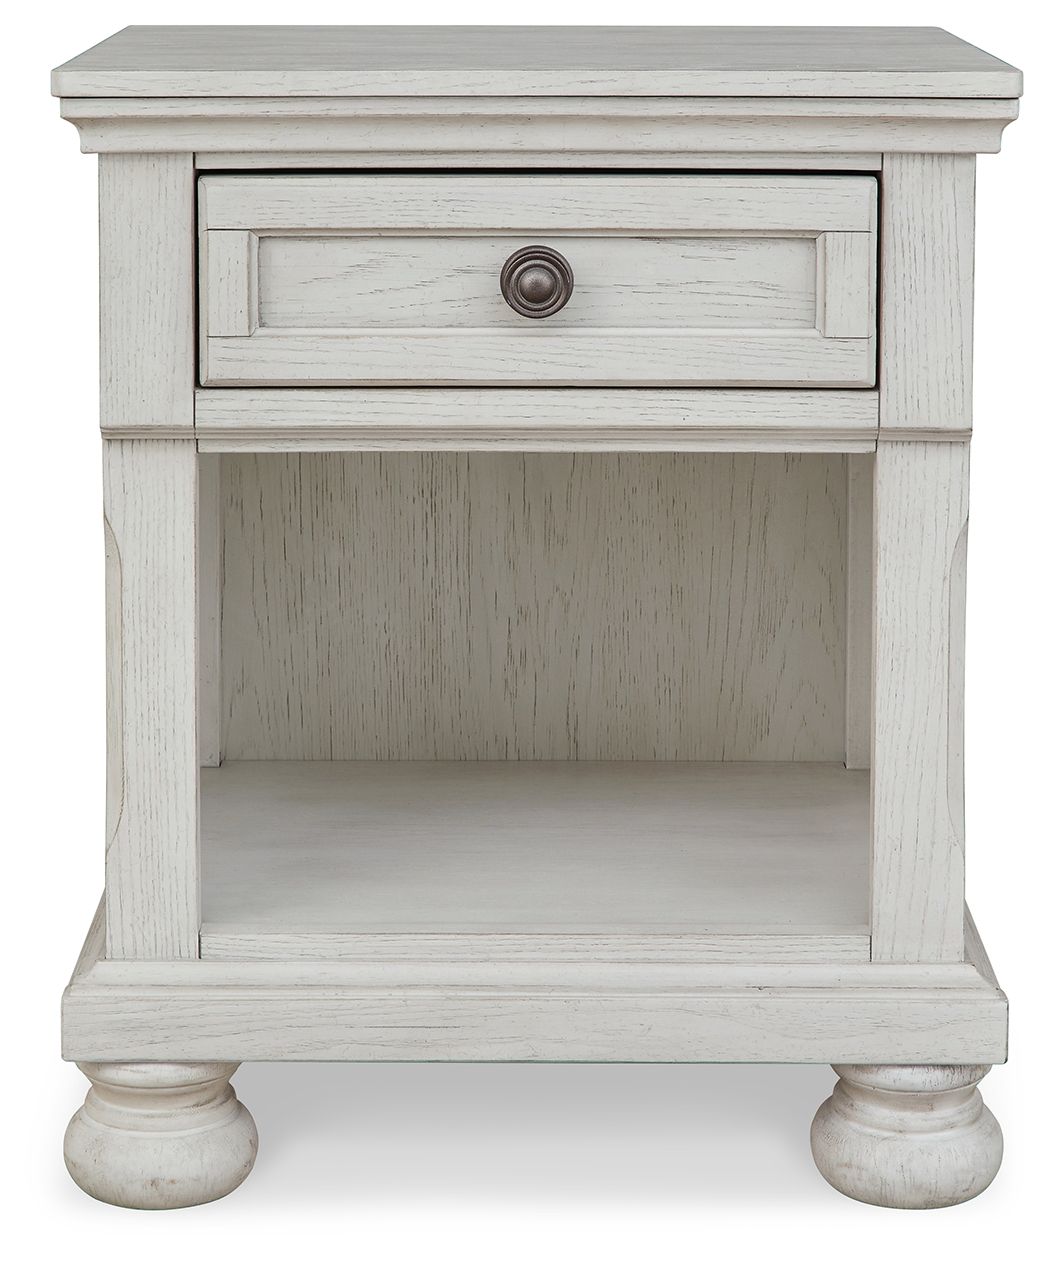 Robbinsdale - Antique White - One Drawer Night Stand - Tony's Home Furnishings